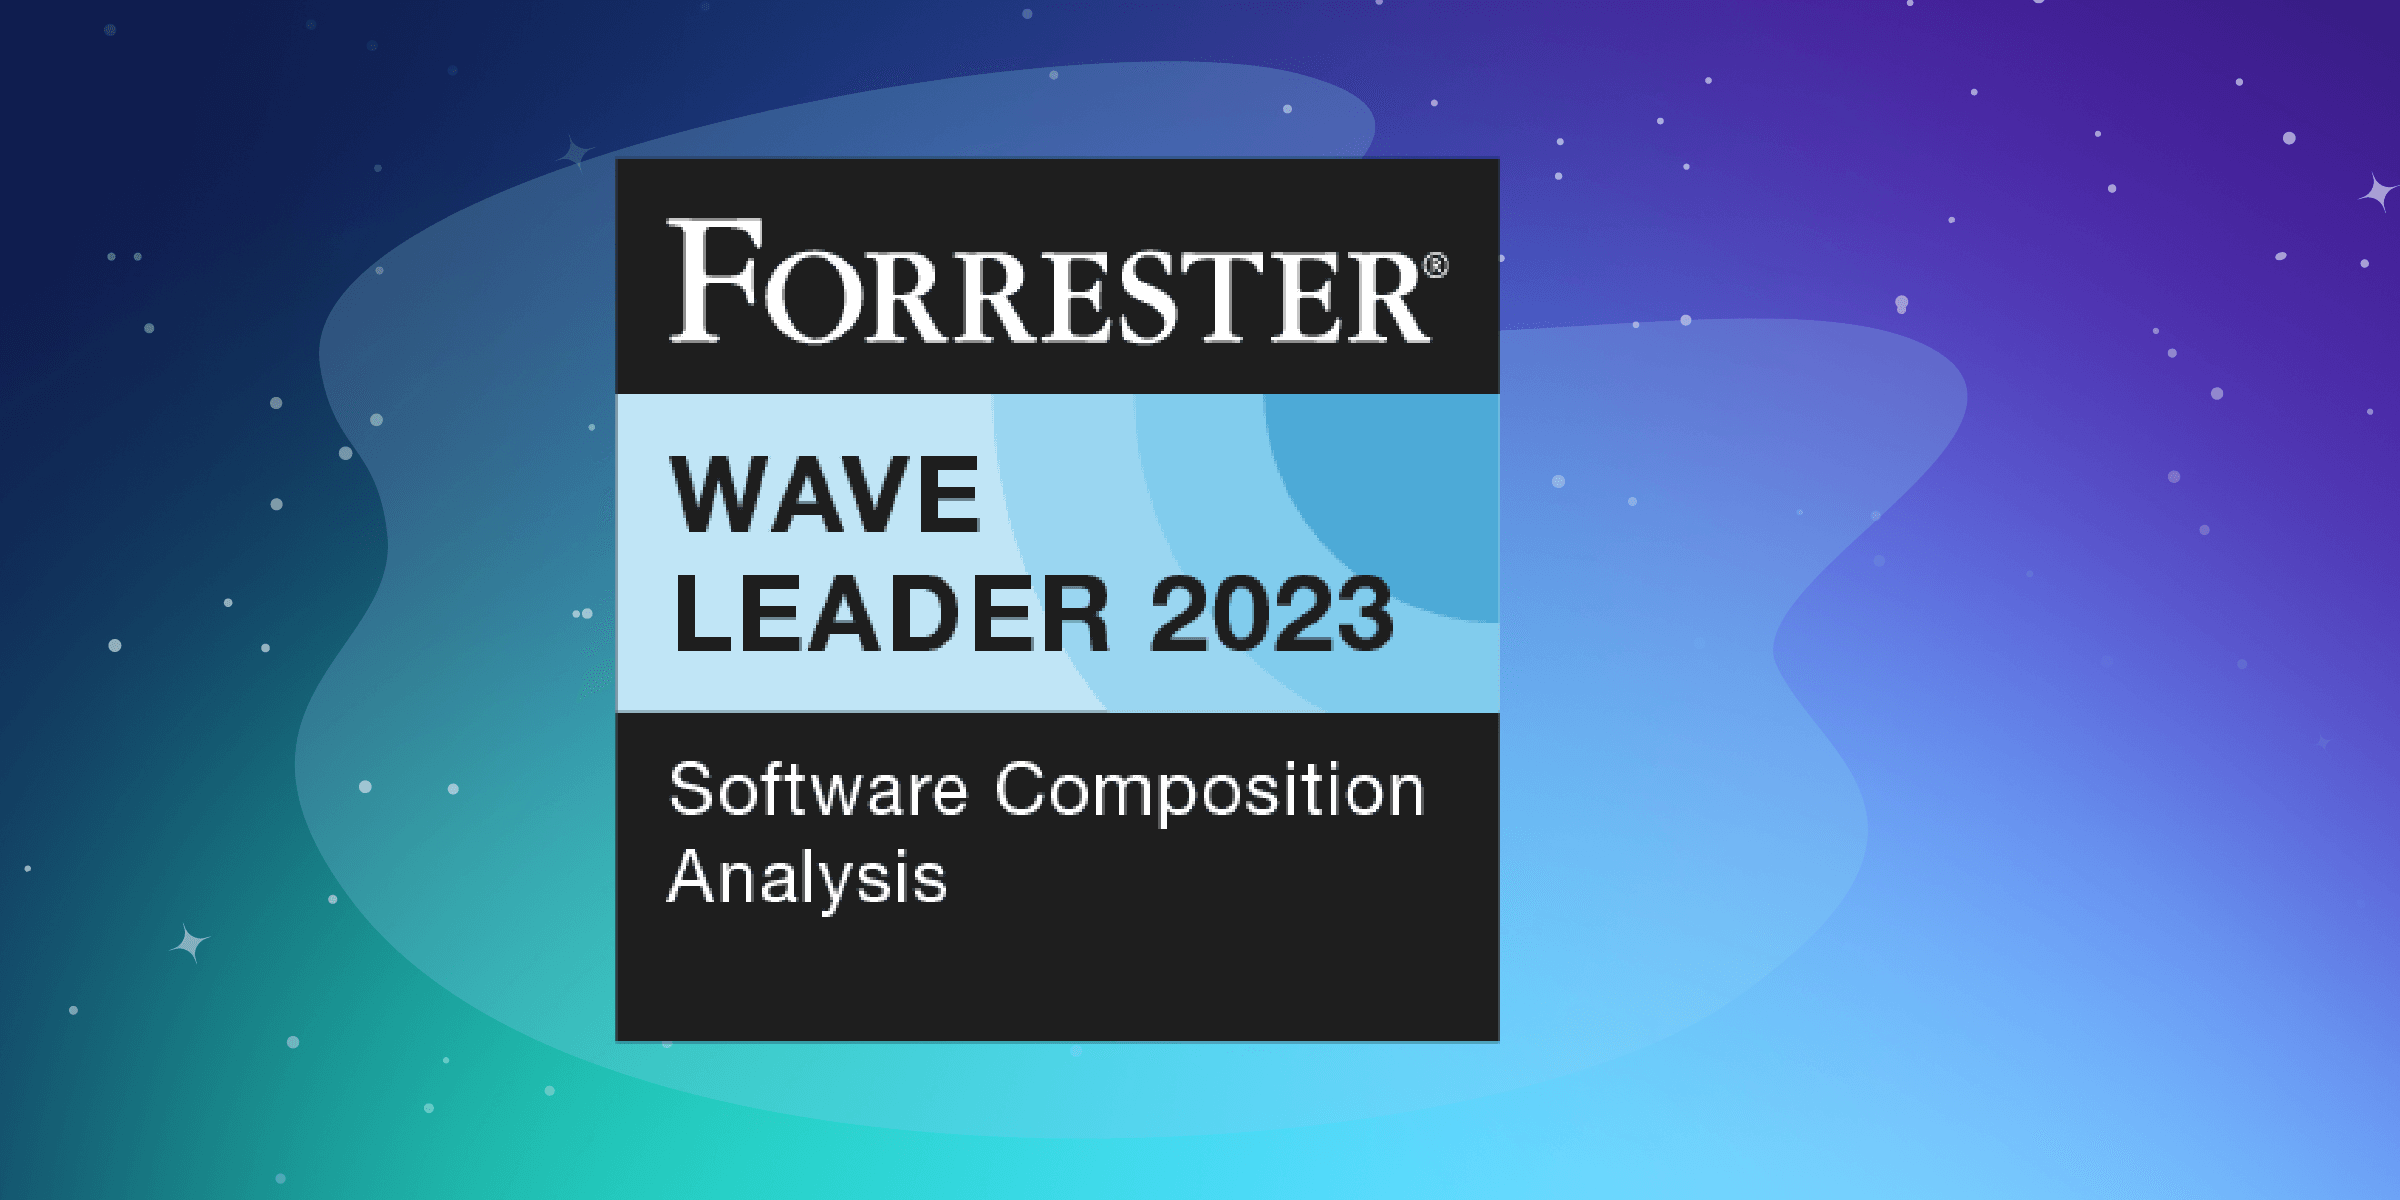 Sonatype Named a Leader in The Forrester Wave™ for Software Composition Analysis